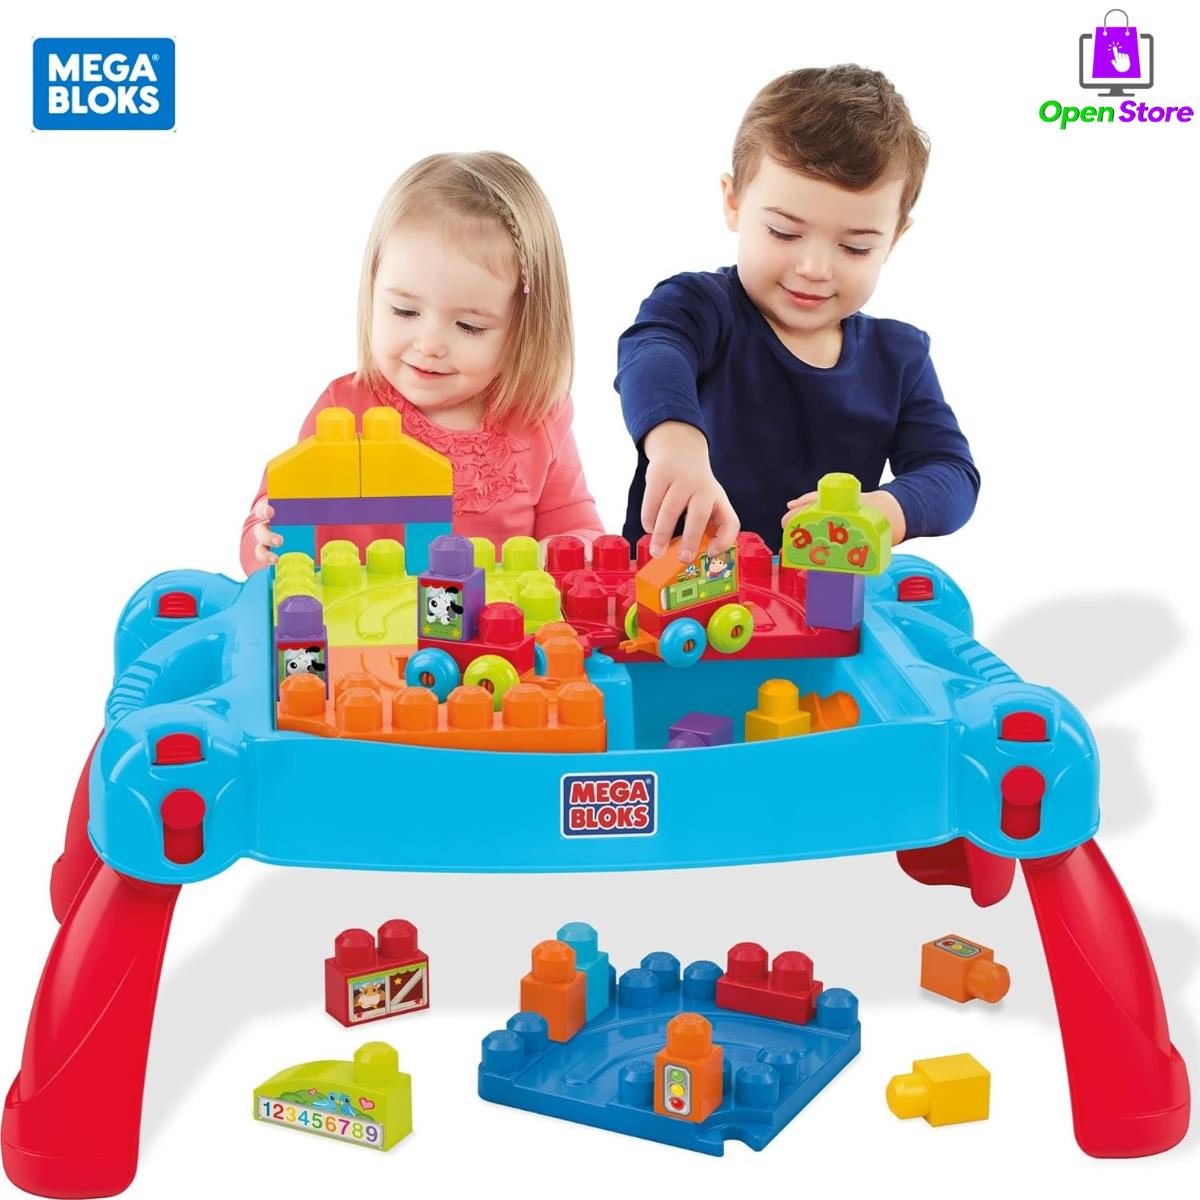 Mega Bloks First Builders Build Learn Table with Multicolor Big Building Blocks